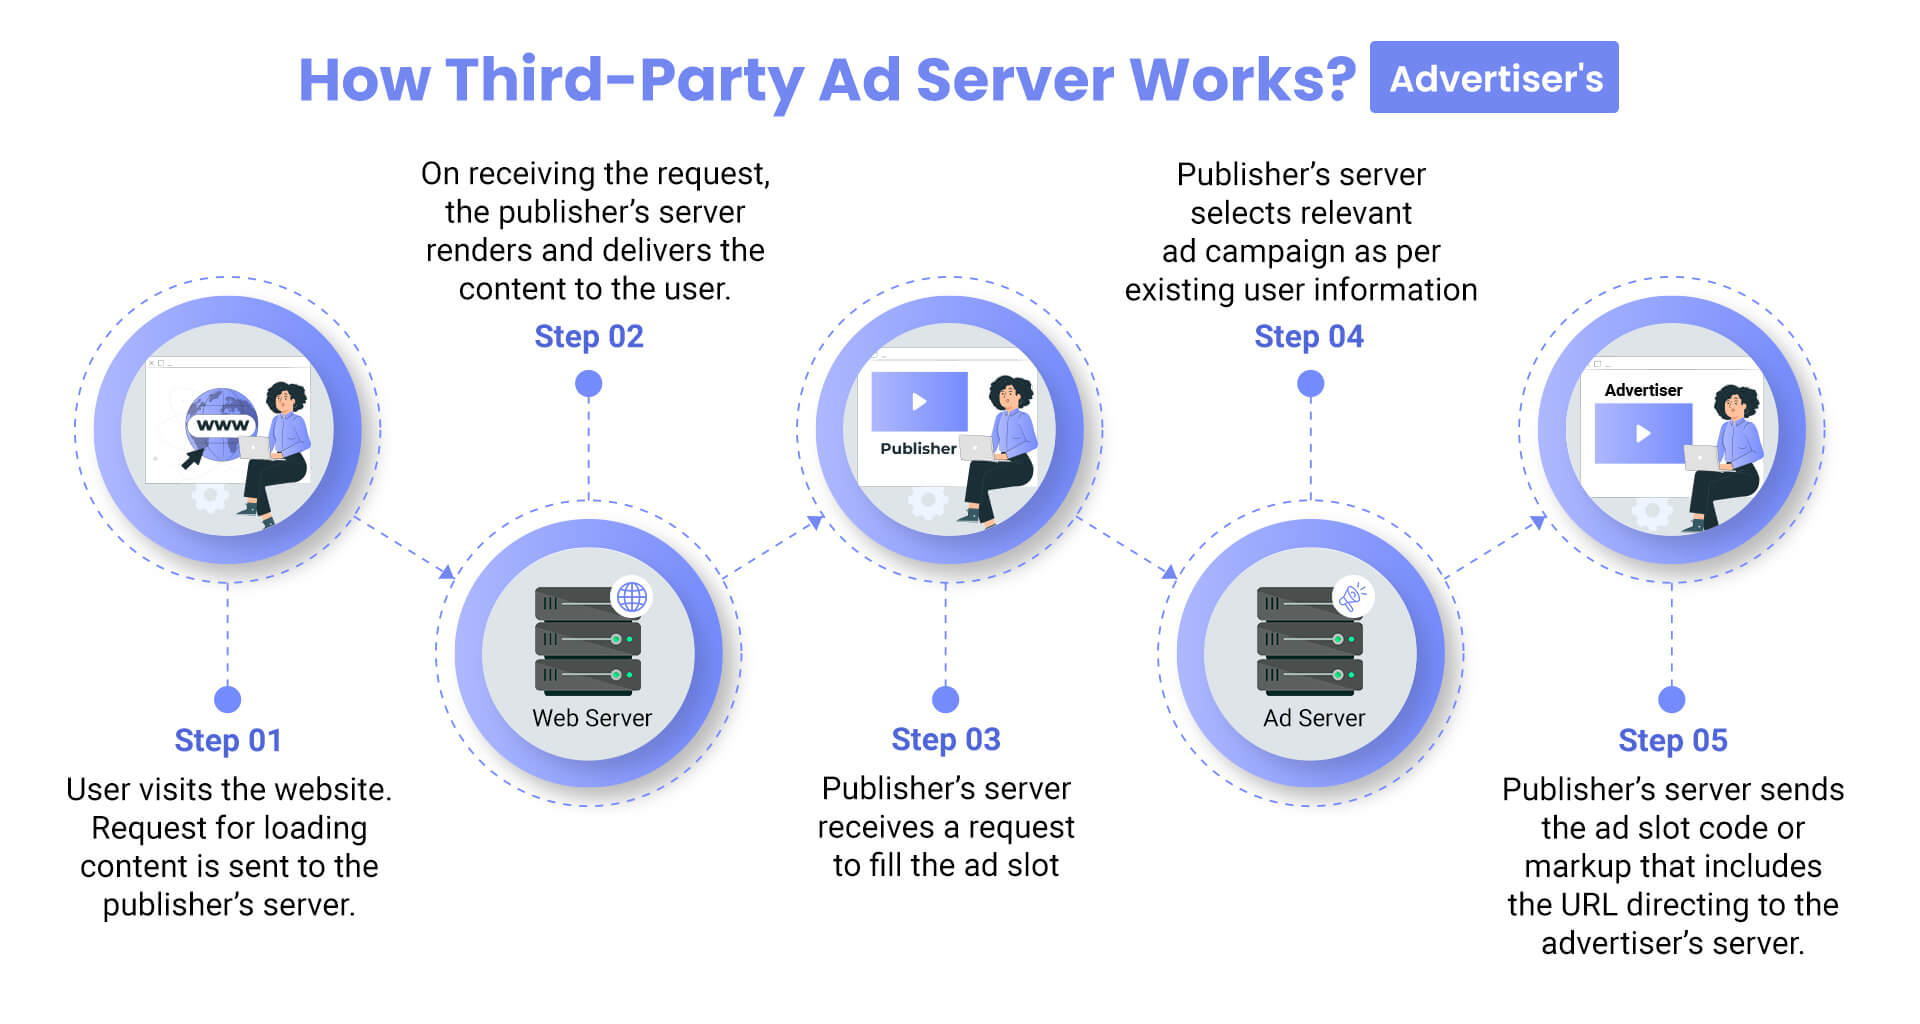 How Third-Party Ad Server Works